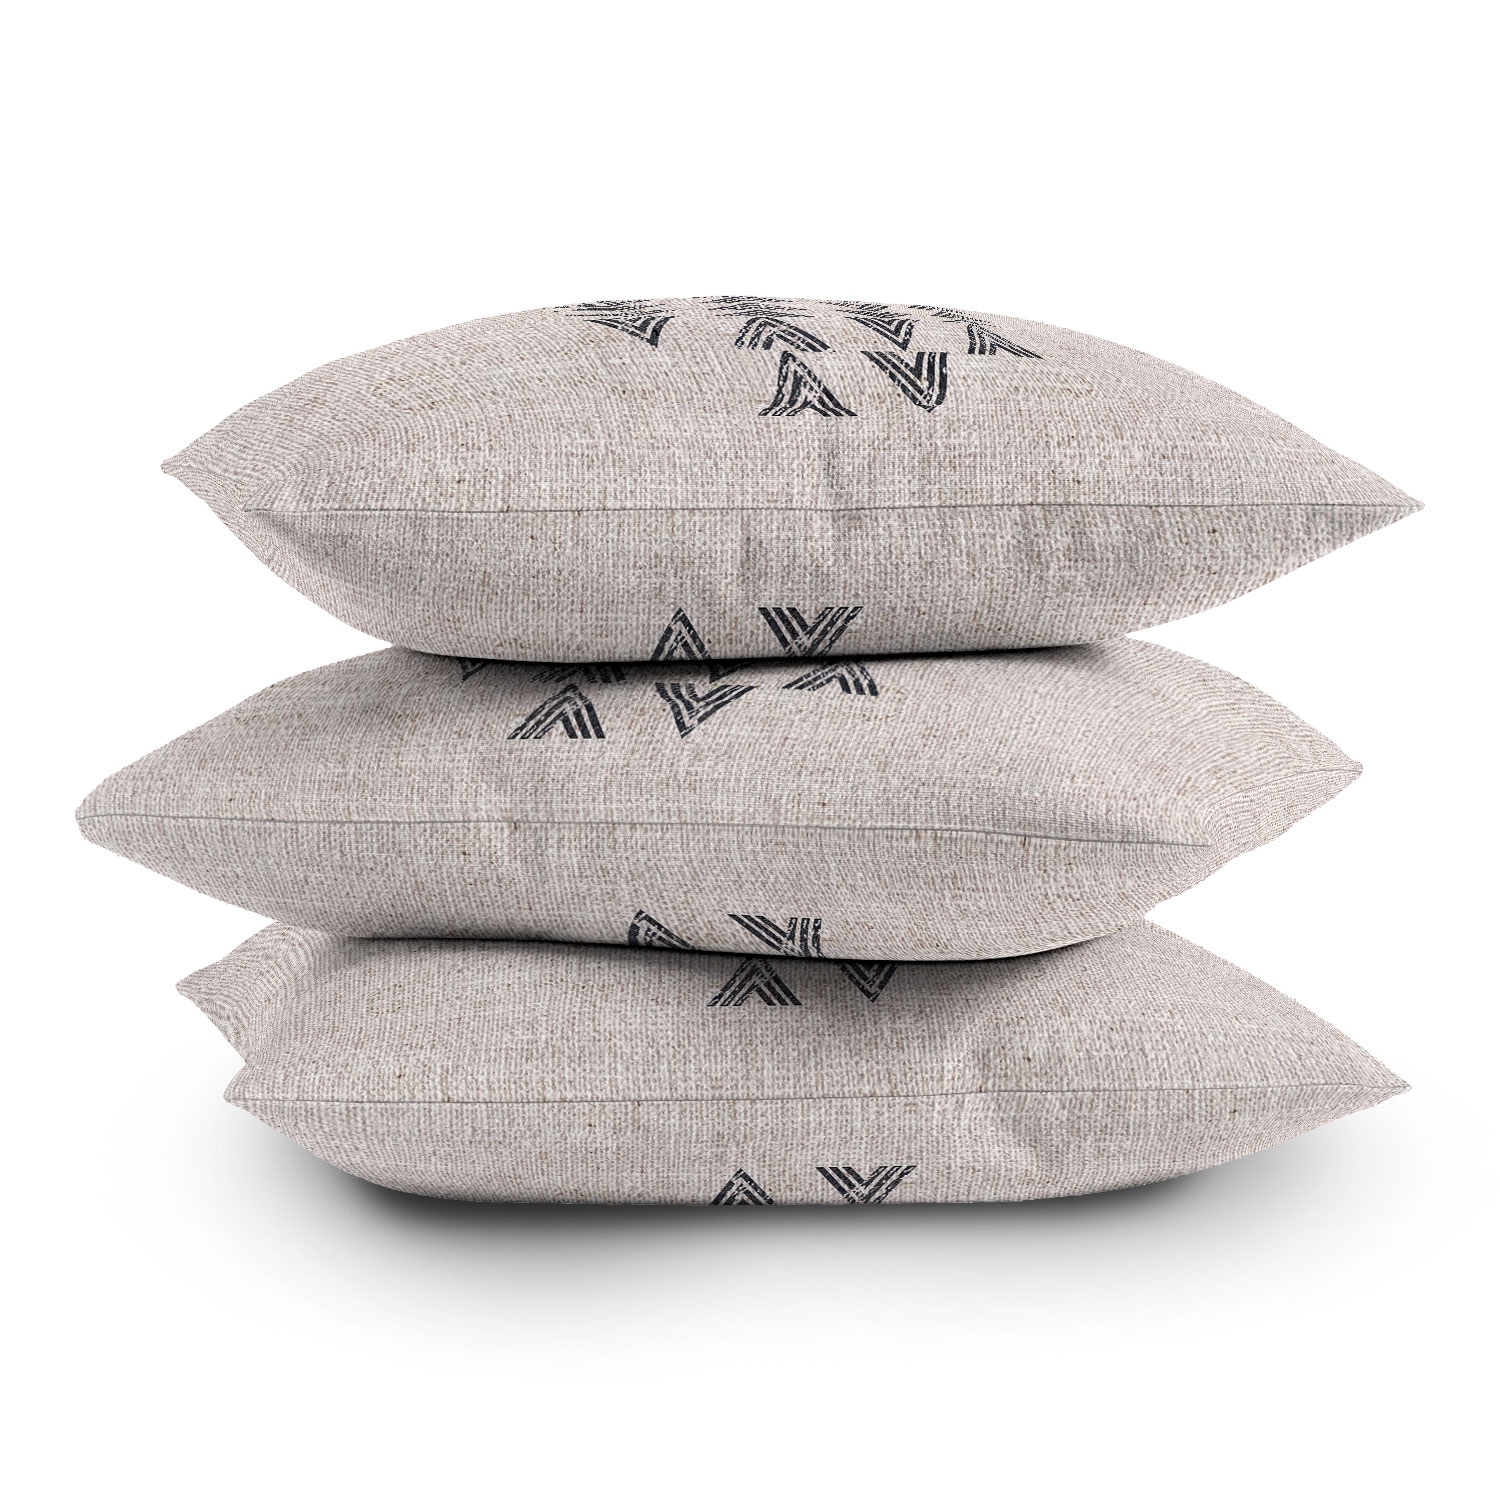 French Linen Tri Arrow by Holli Zollinger - Outdoor Throw Pillow 16" x 16" - Image 3